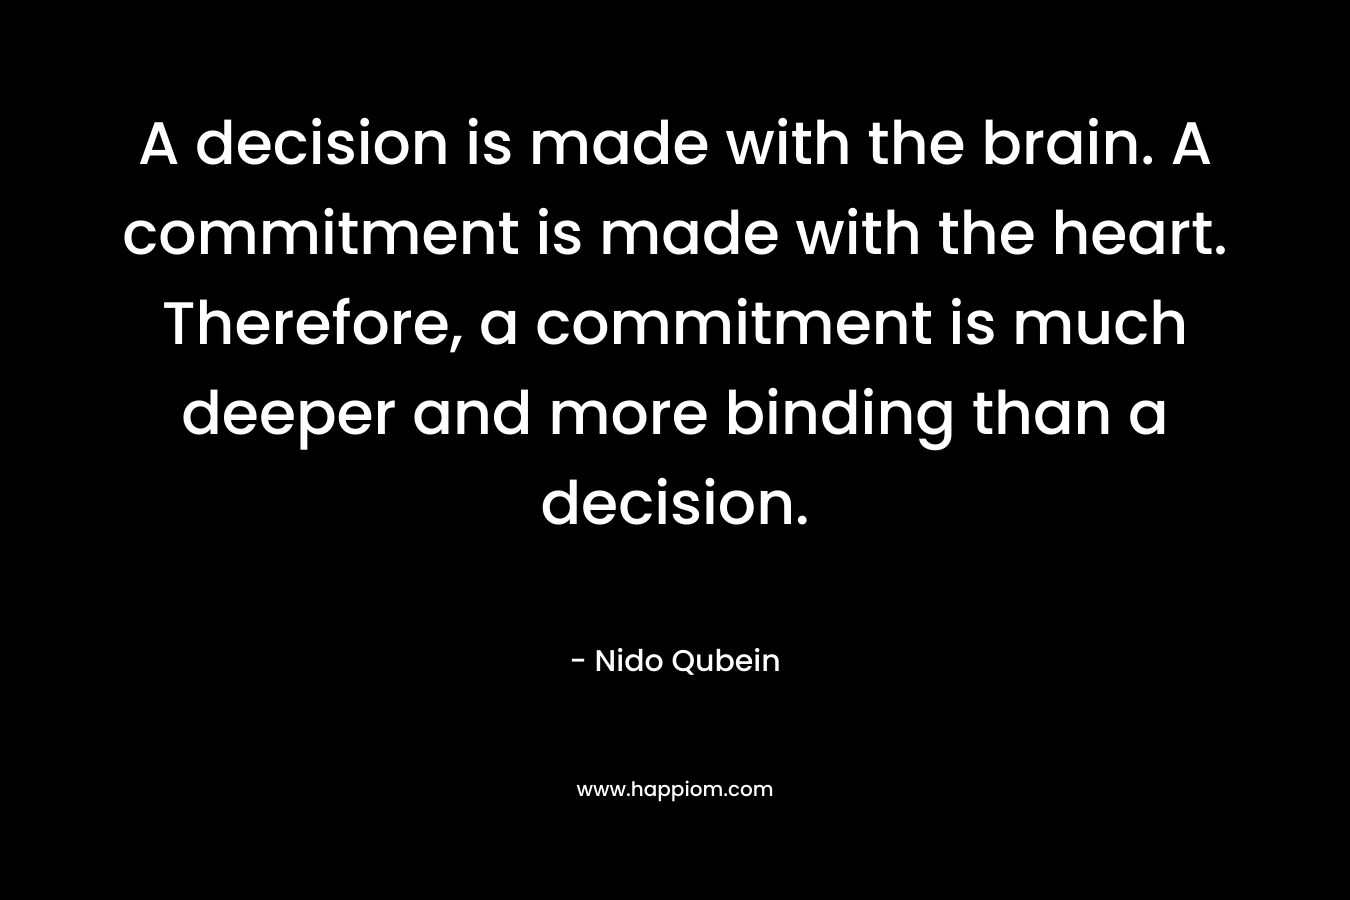 A decision is made with the brain. A commitment is made with the heart. Therefore, a commitment is much deeper and more binding than a decision.